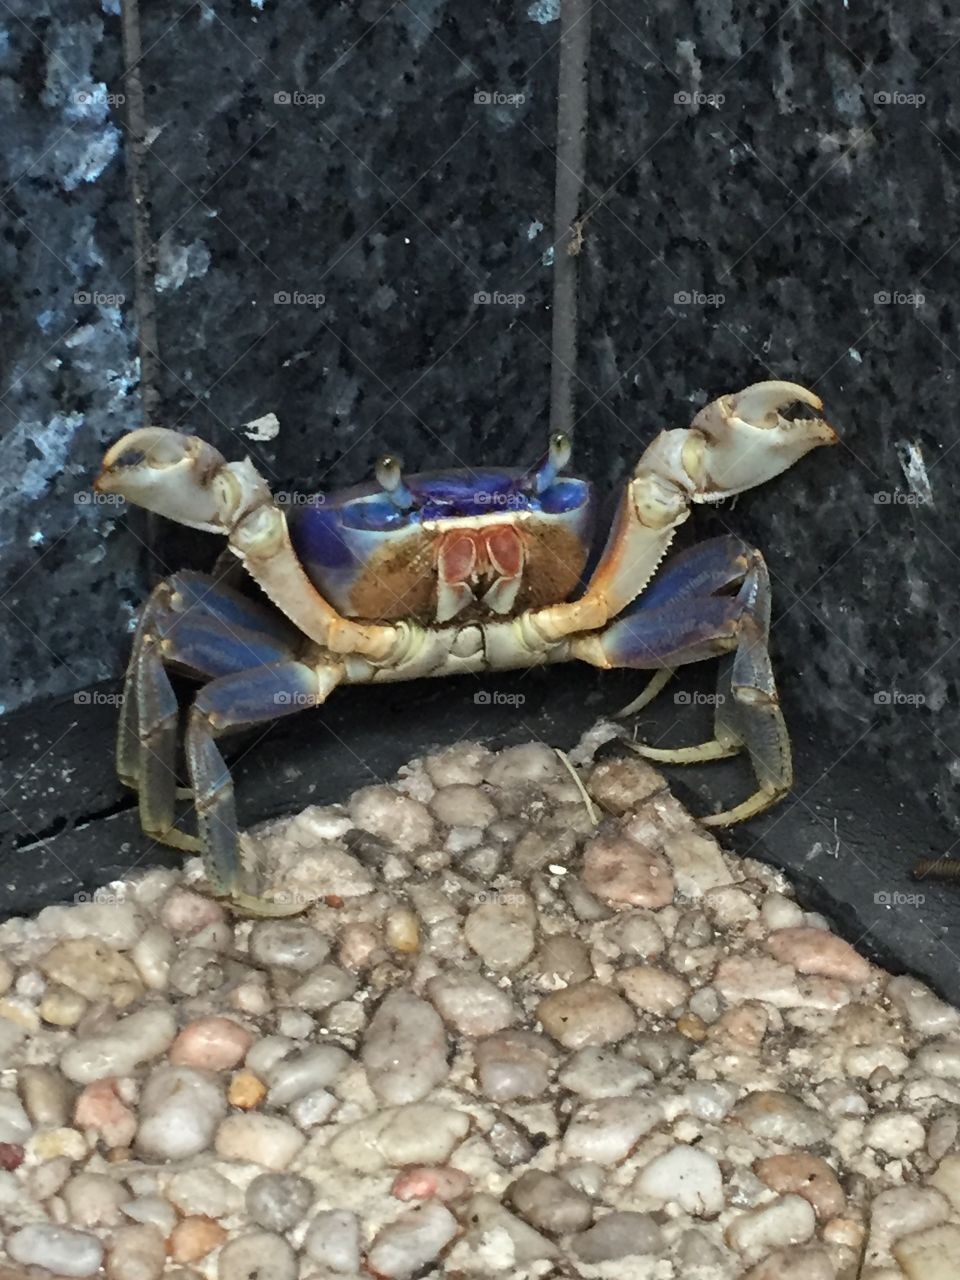 Blue land crab at the cemetery 